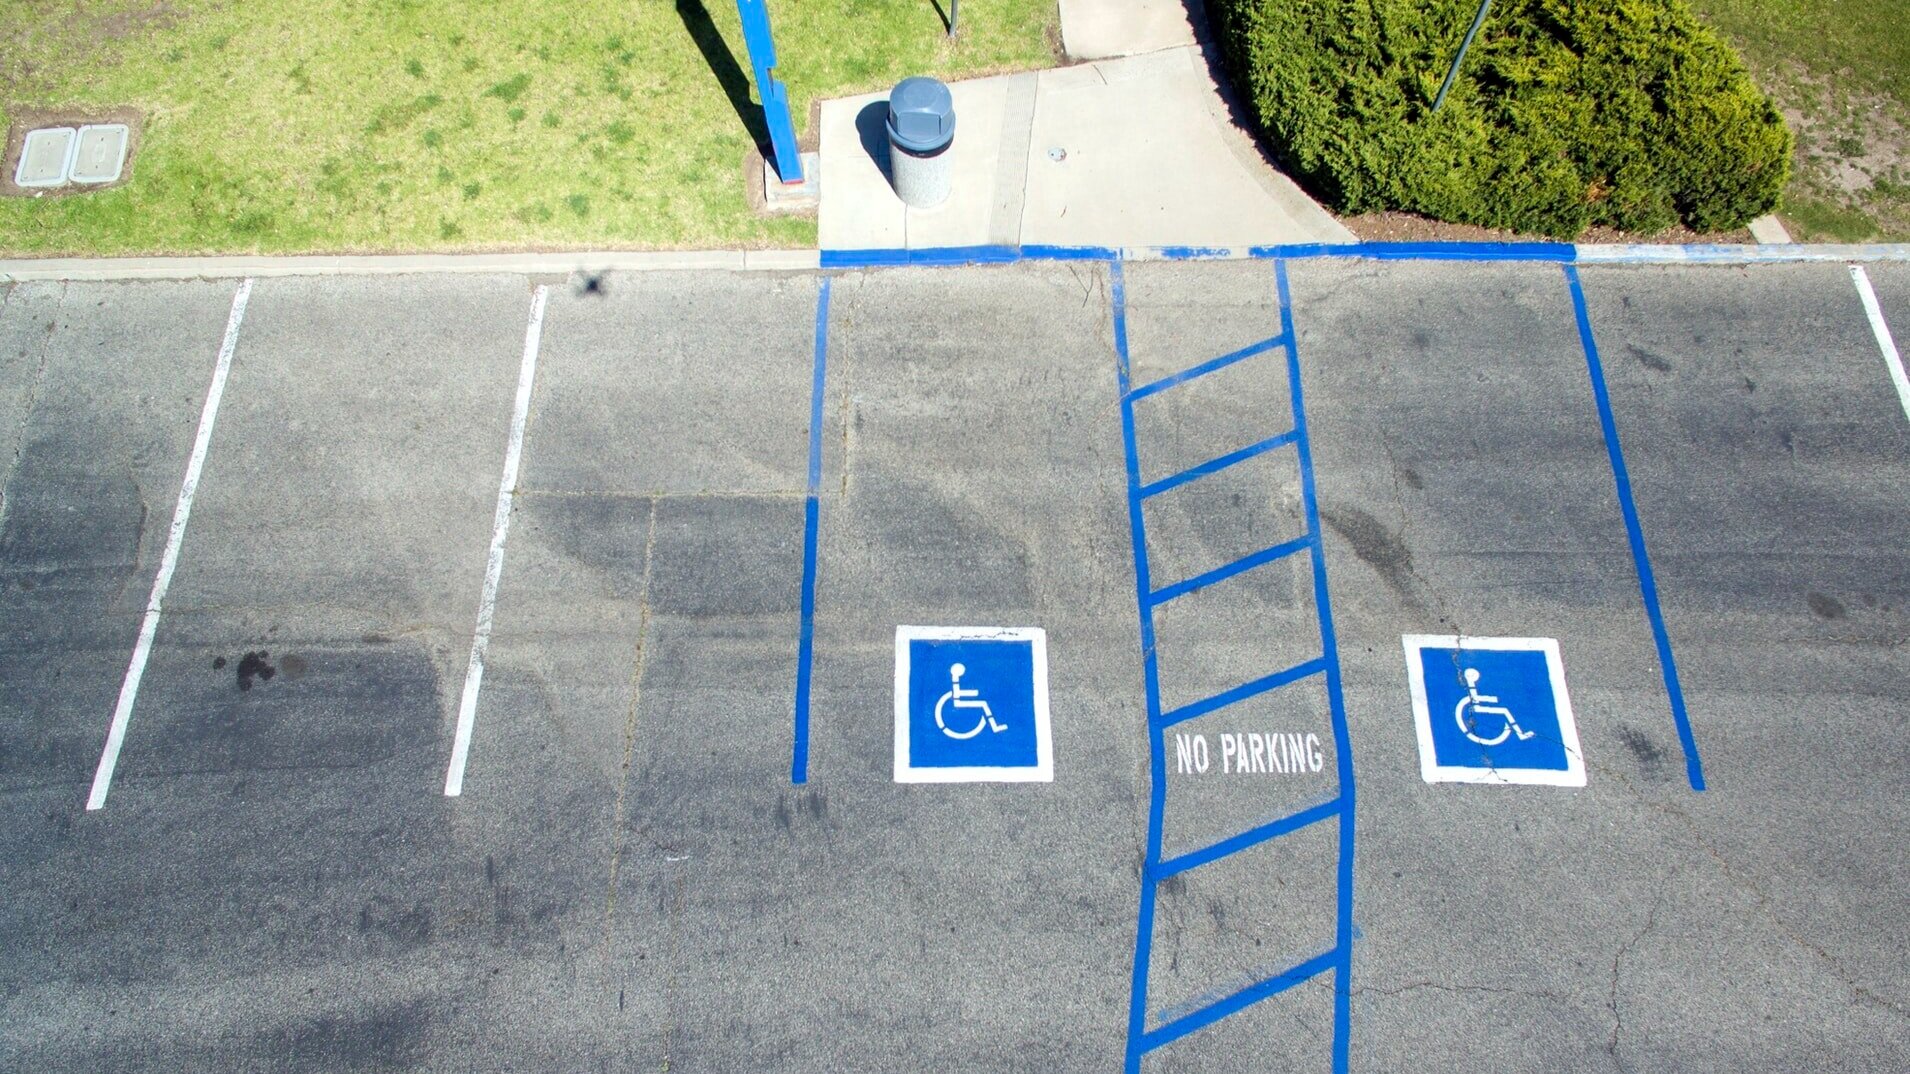 Accessible Parking - Department of Transportation and Logistics